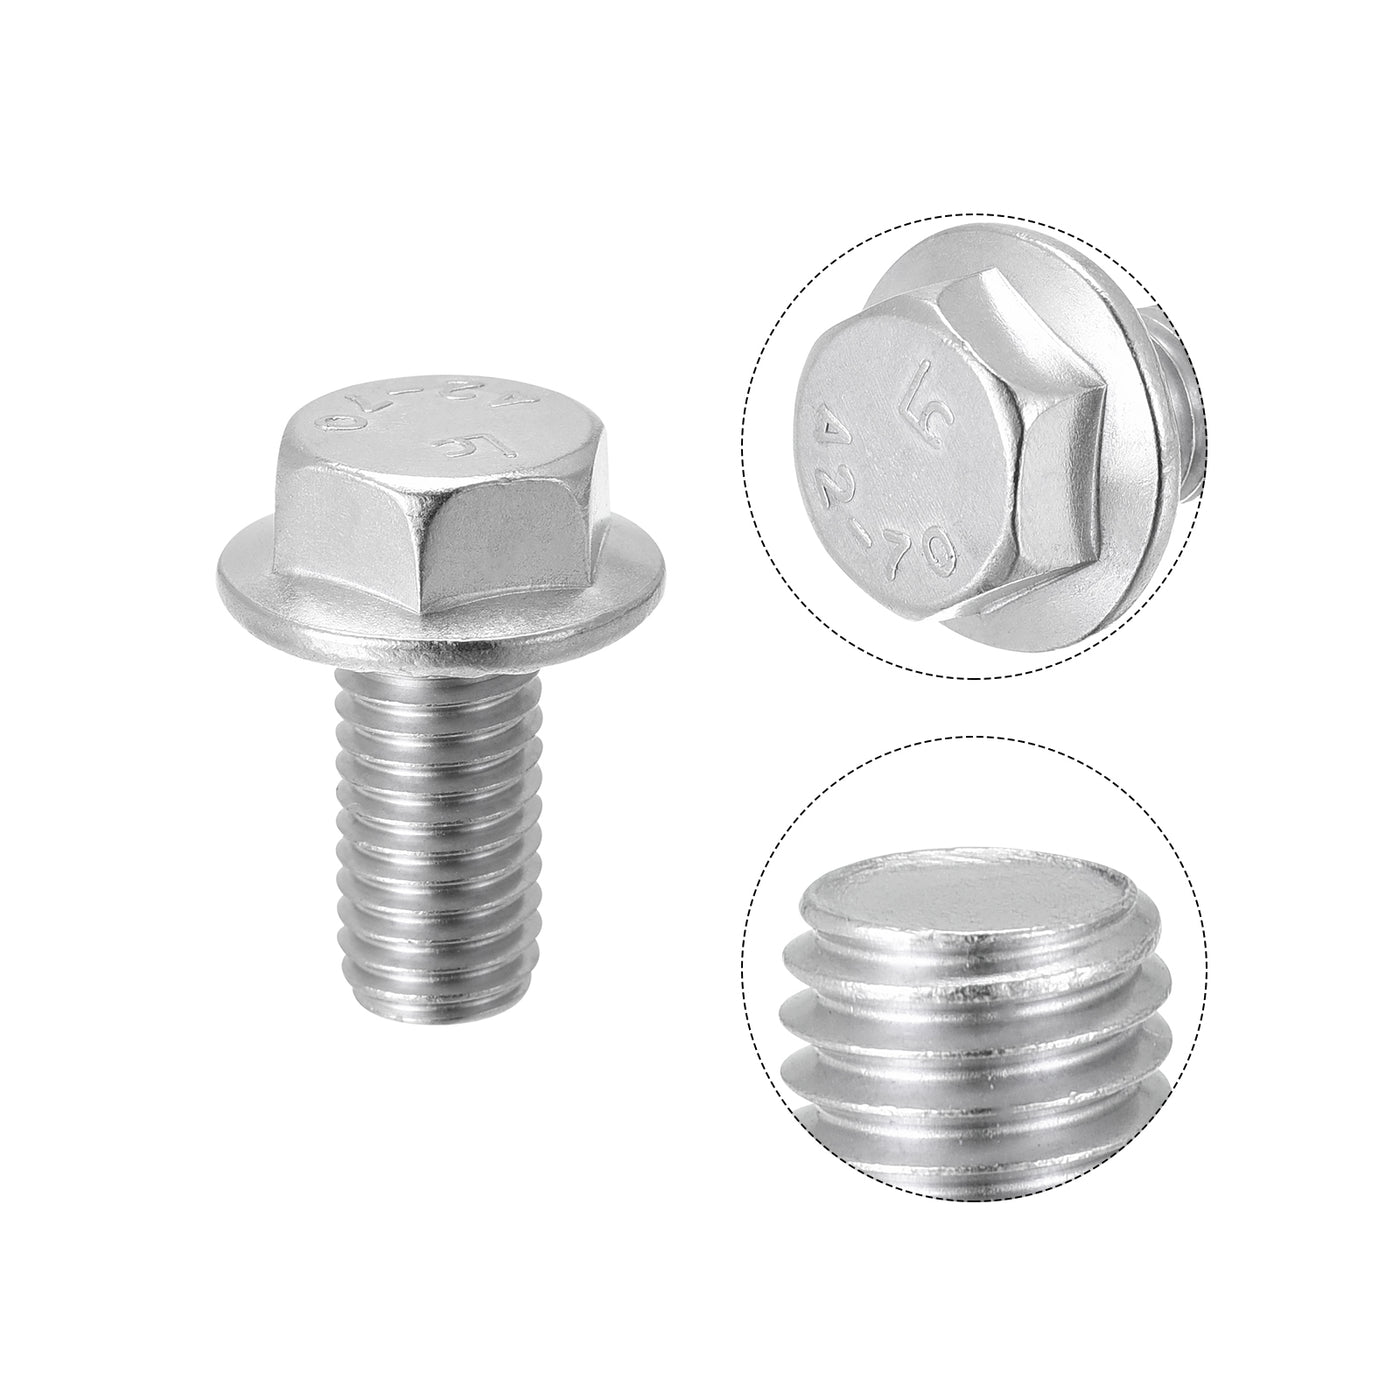 Uxcell Uxcell M10x60mm Hex Serrated Flange Bolts Screws Metric Thread 304 Stainless Steel 6pcs